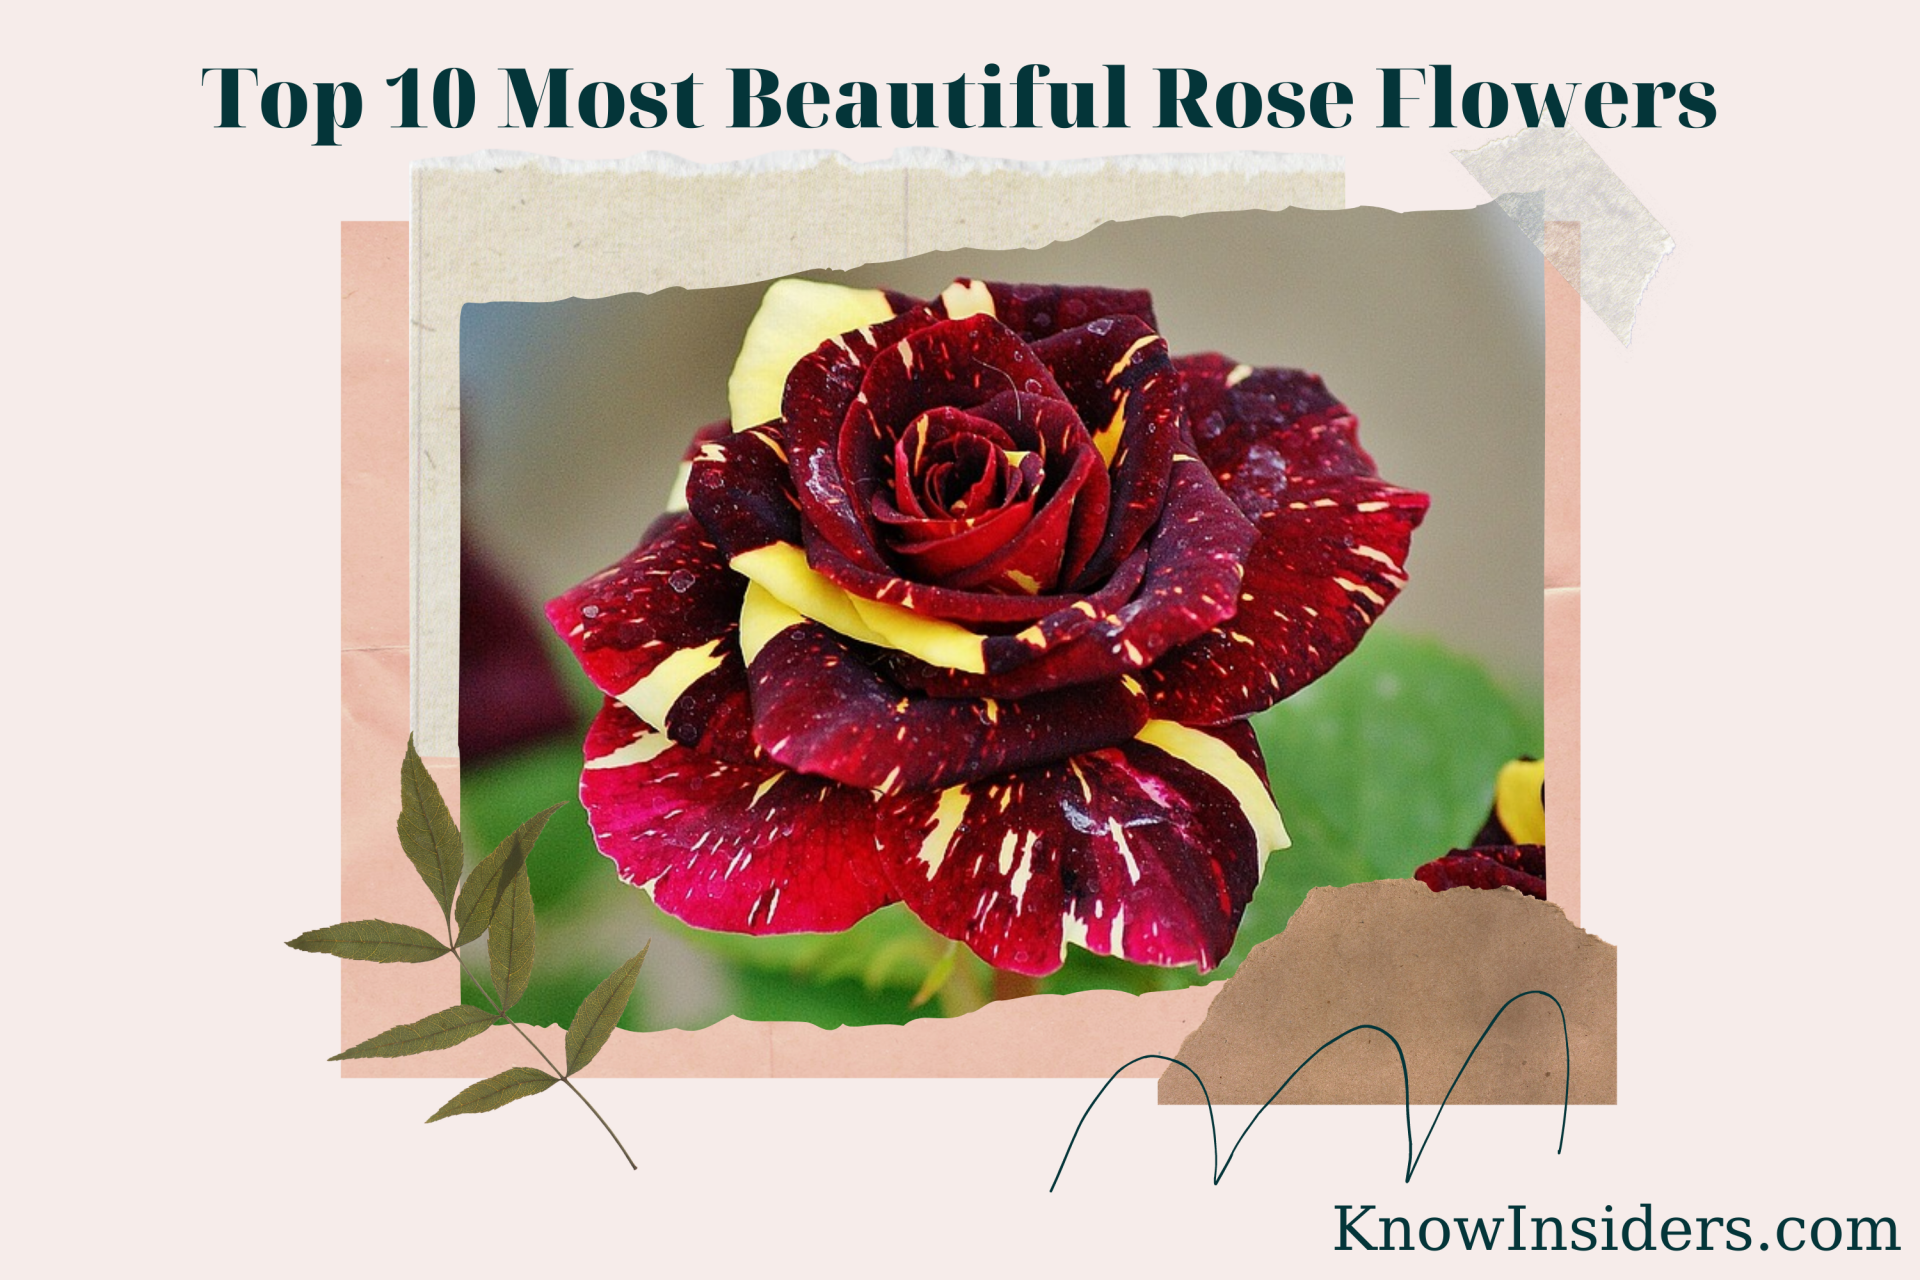 Top 10 Most Beautiful Rose Flowers